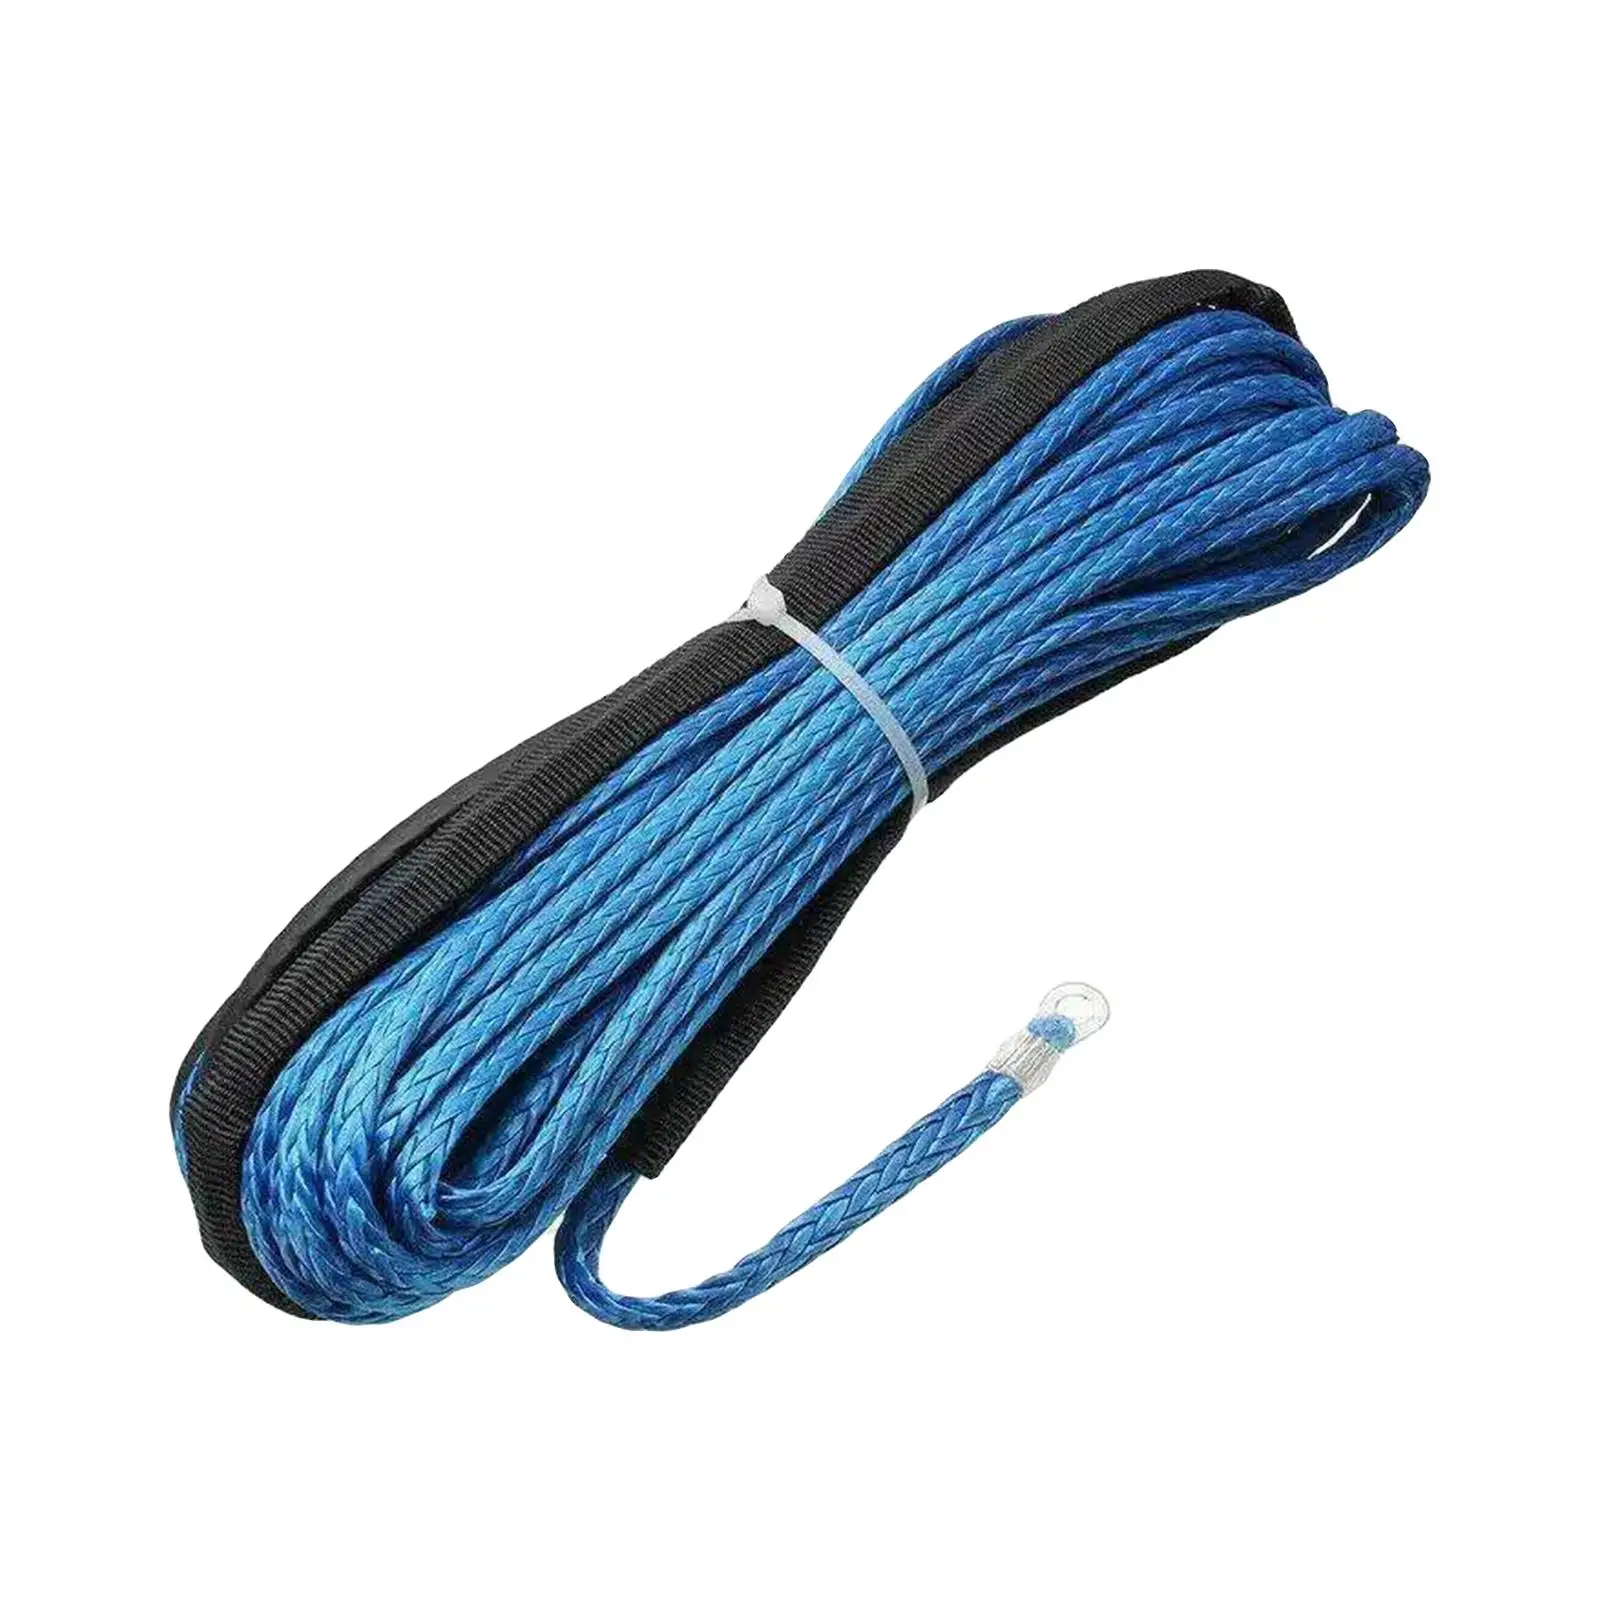 Synthetic Winch Rope 50ft Vehicles Towing 2.5T Towing Winch Cable Cars Truck